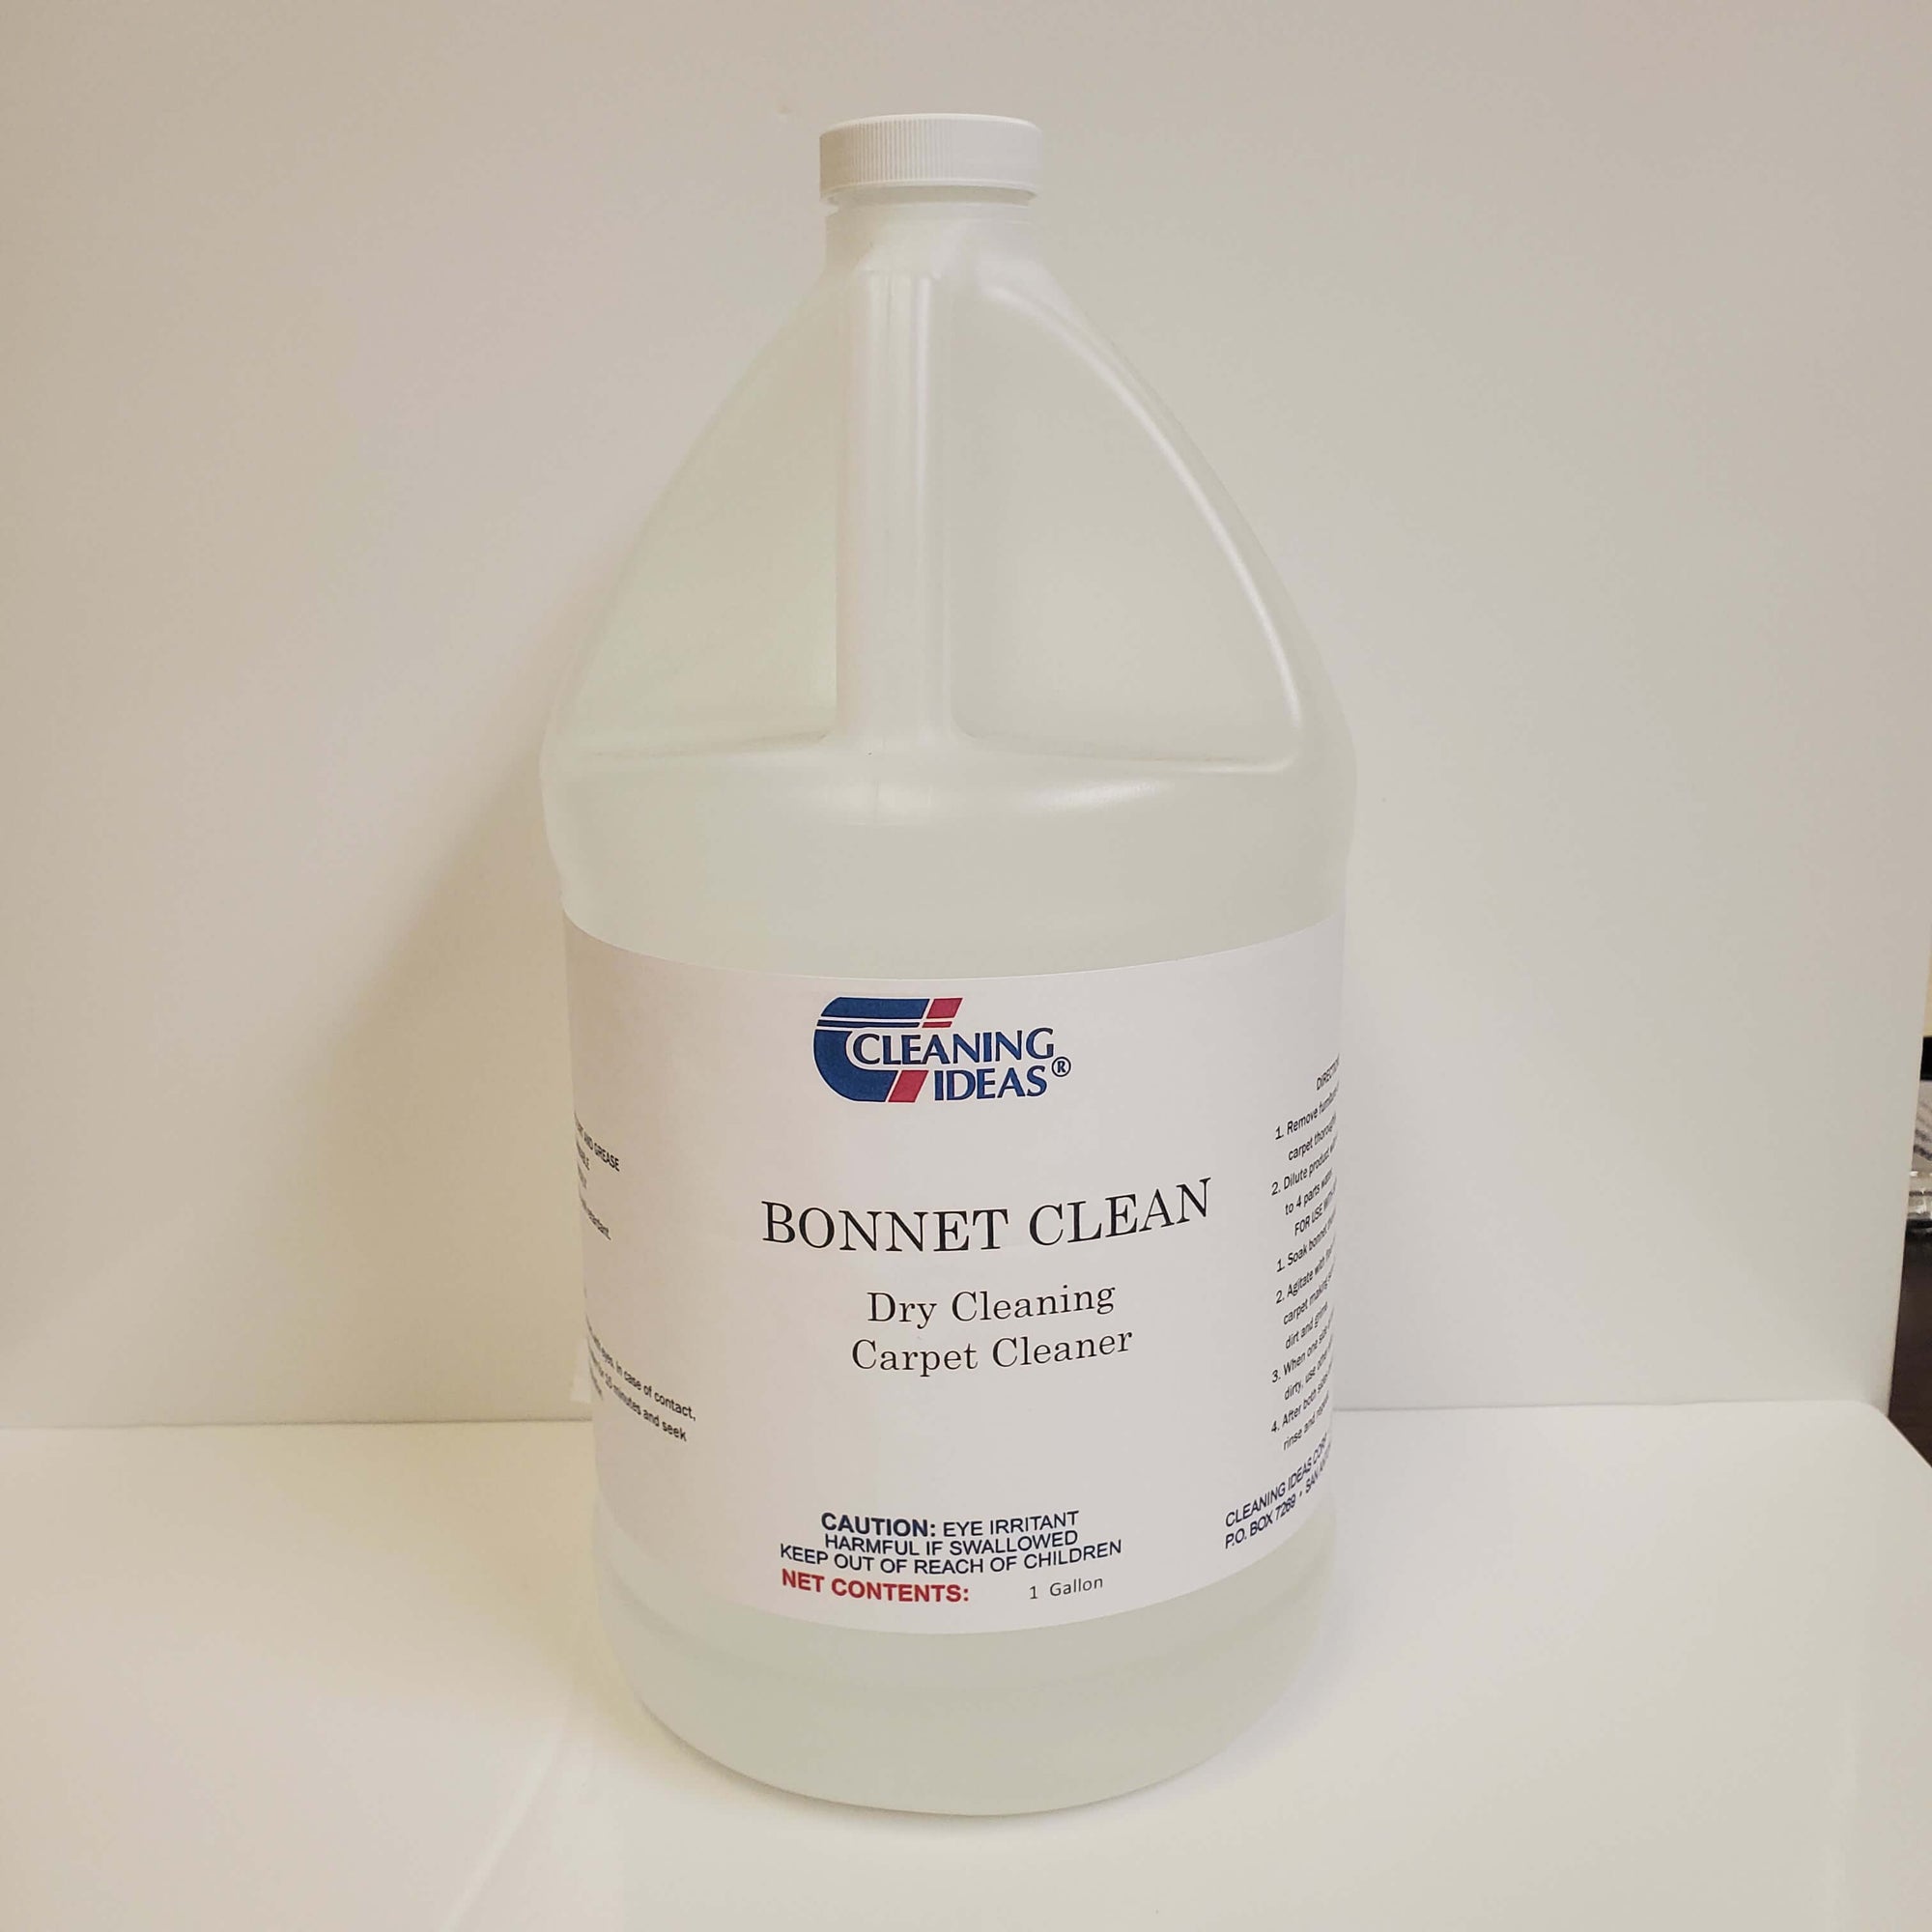 Bonnet Clean Dry Cleaning Carpet Cleaner